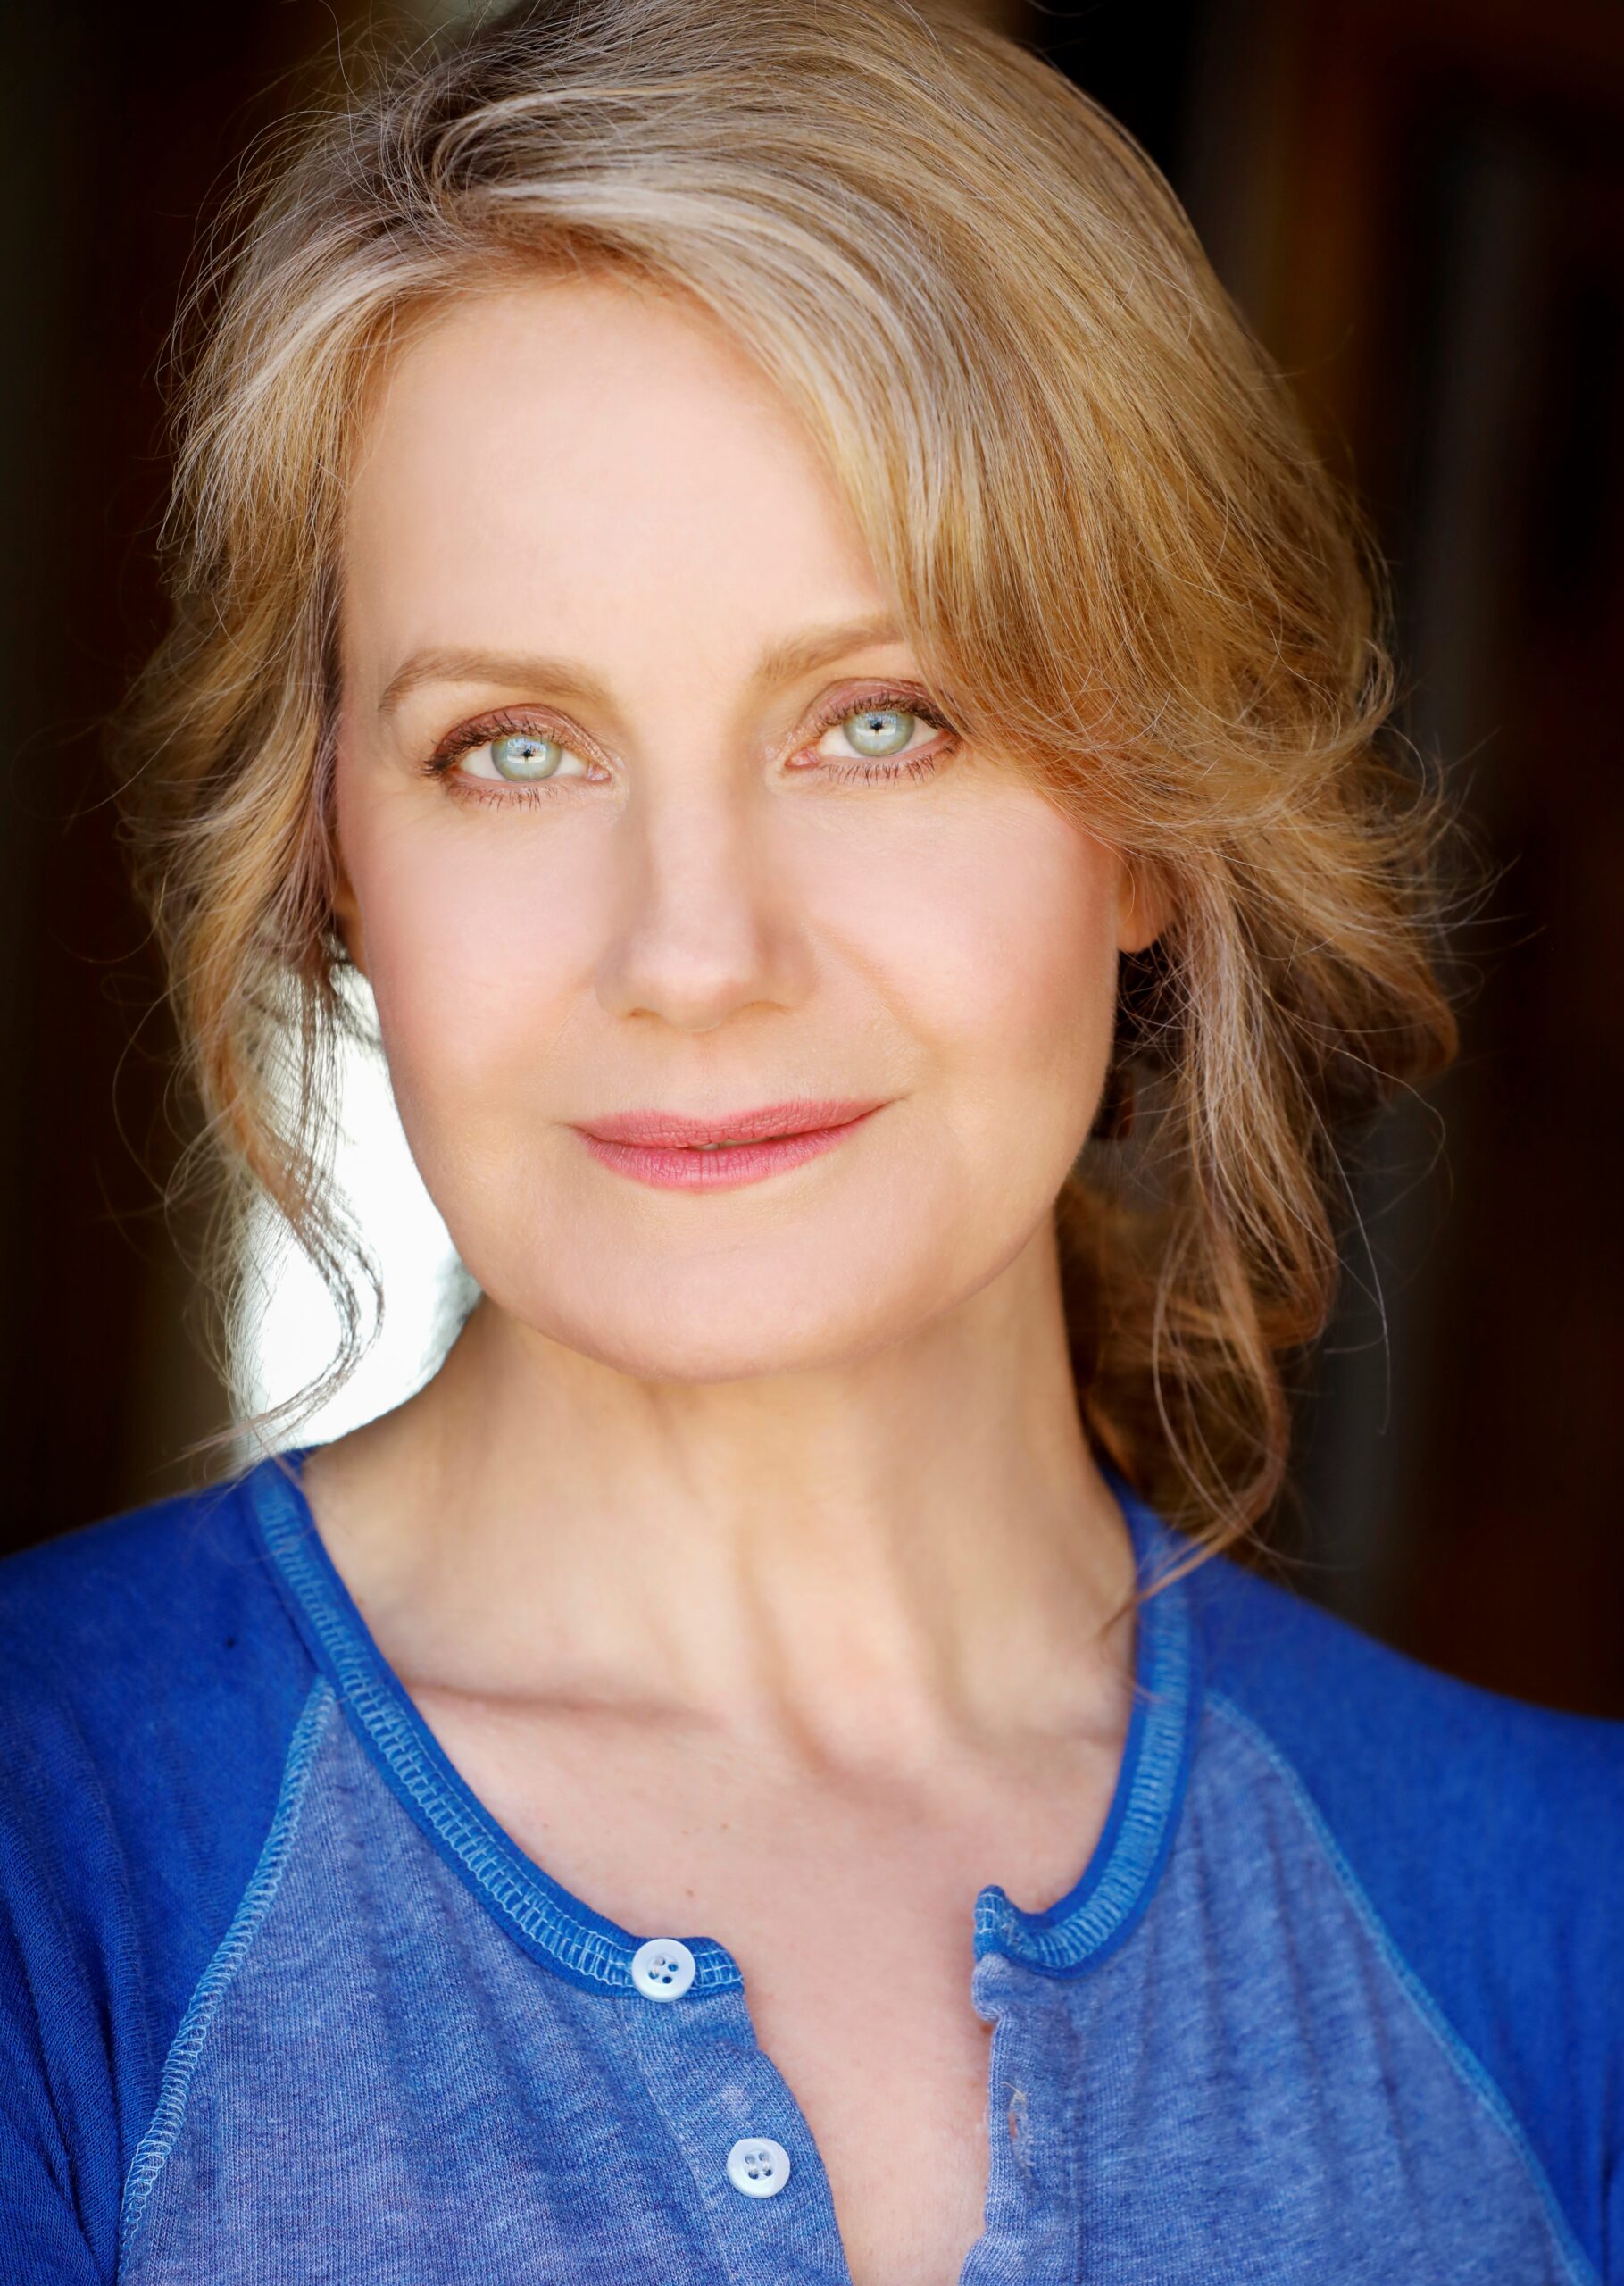 Actress, Eileen Grubba, blonde wavy hair, pulled back, light blue eyes, wearing a blue t-shirt, and a slight smile.